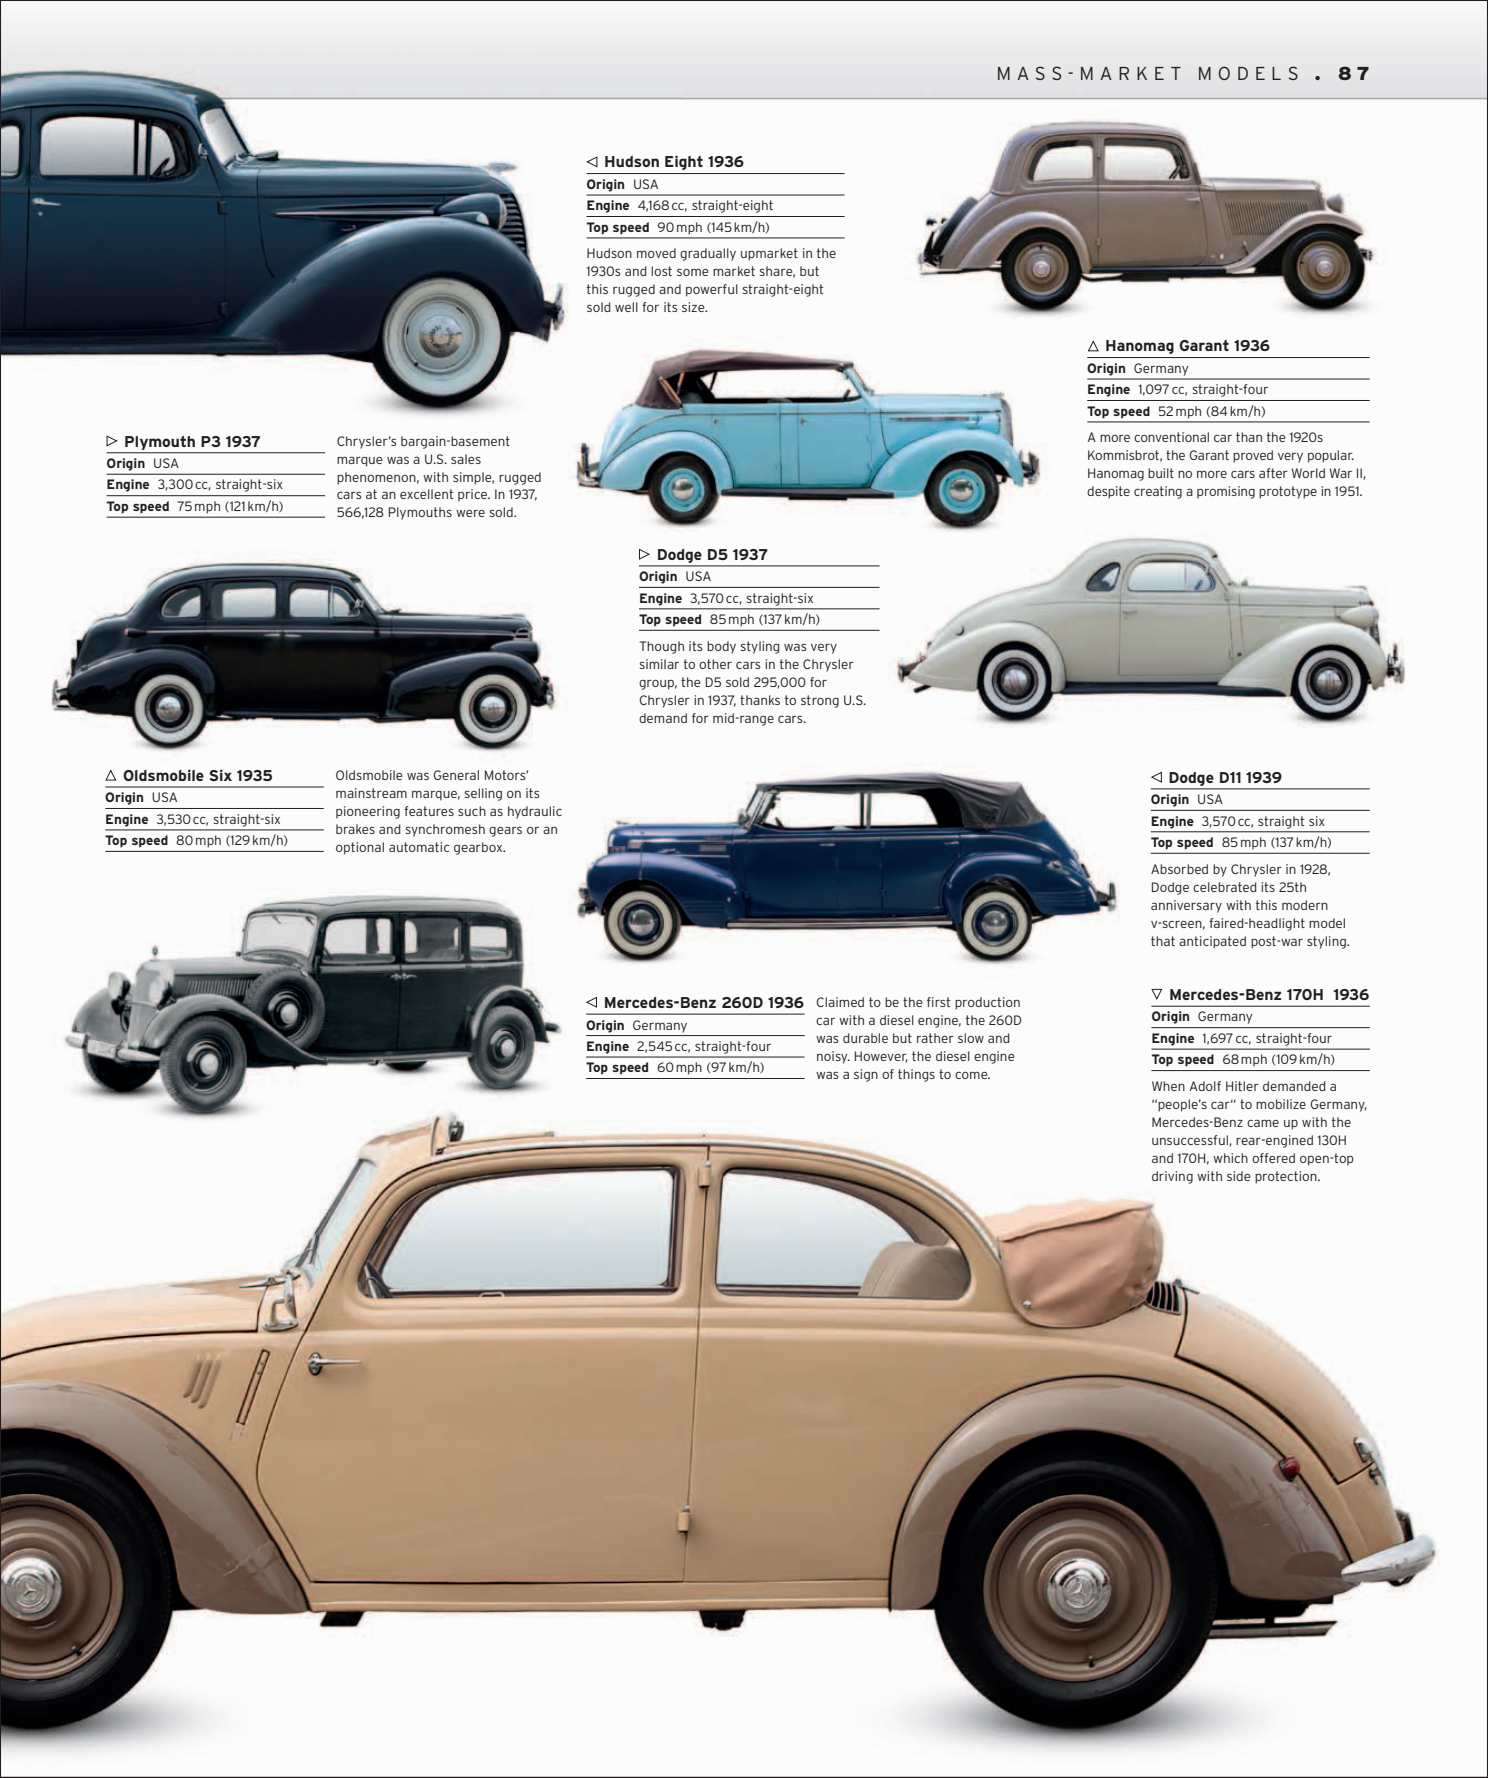 Car%20-%20The%20Definitive%20Visual%20History%20of%20the%20Automobile_089.png